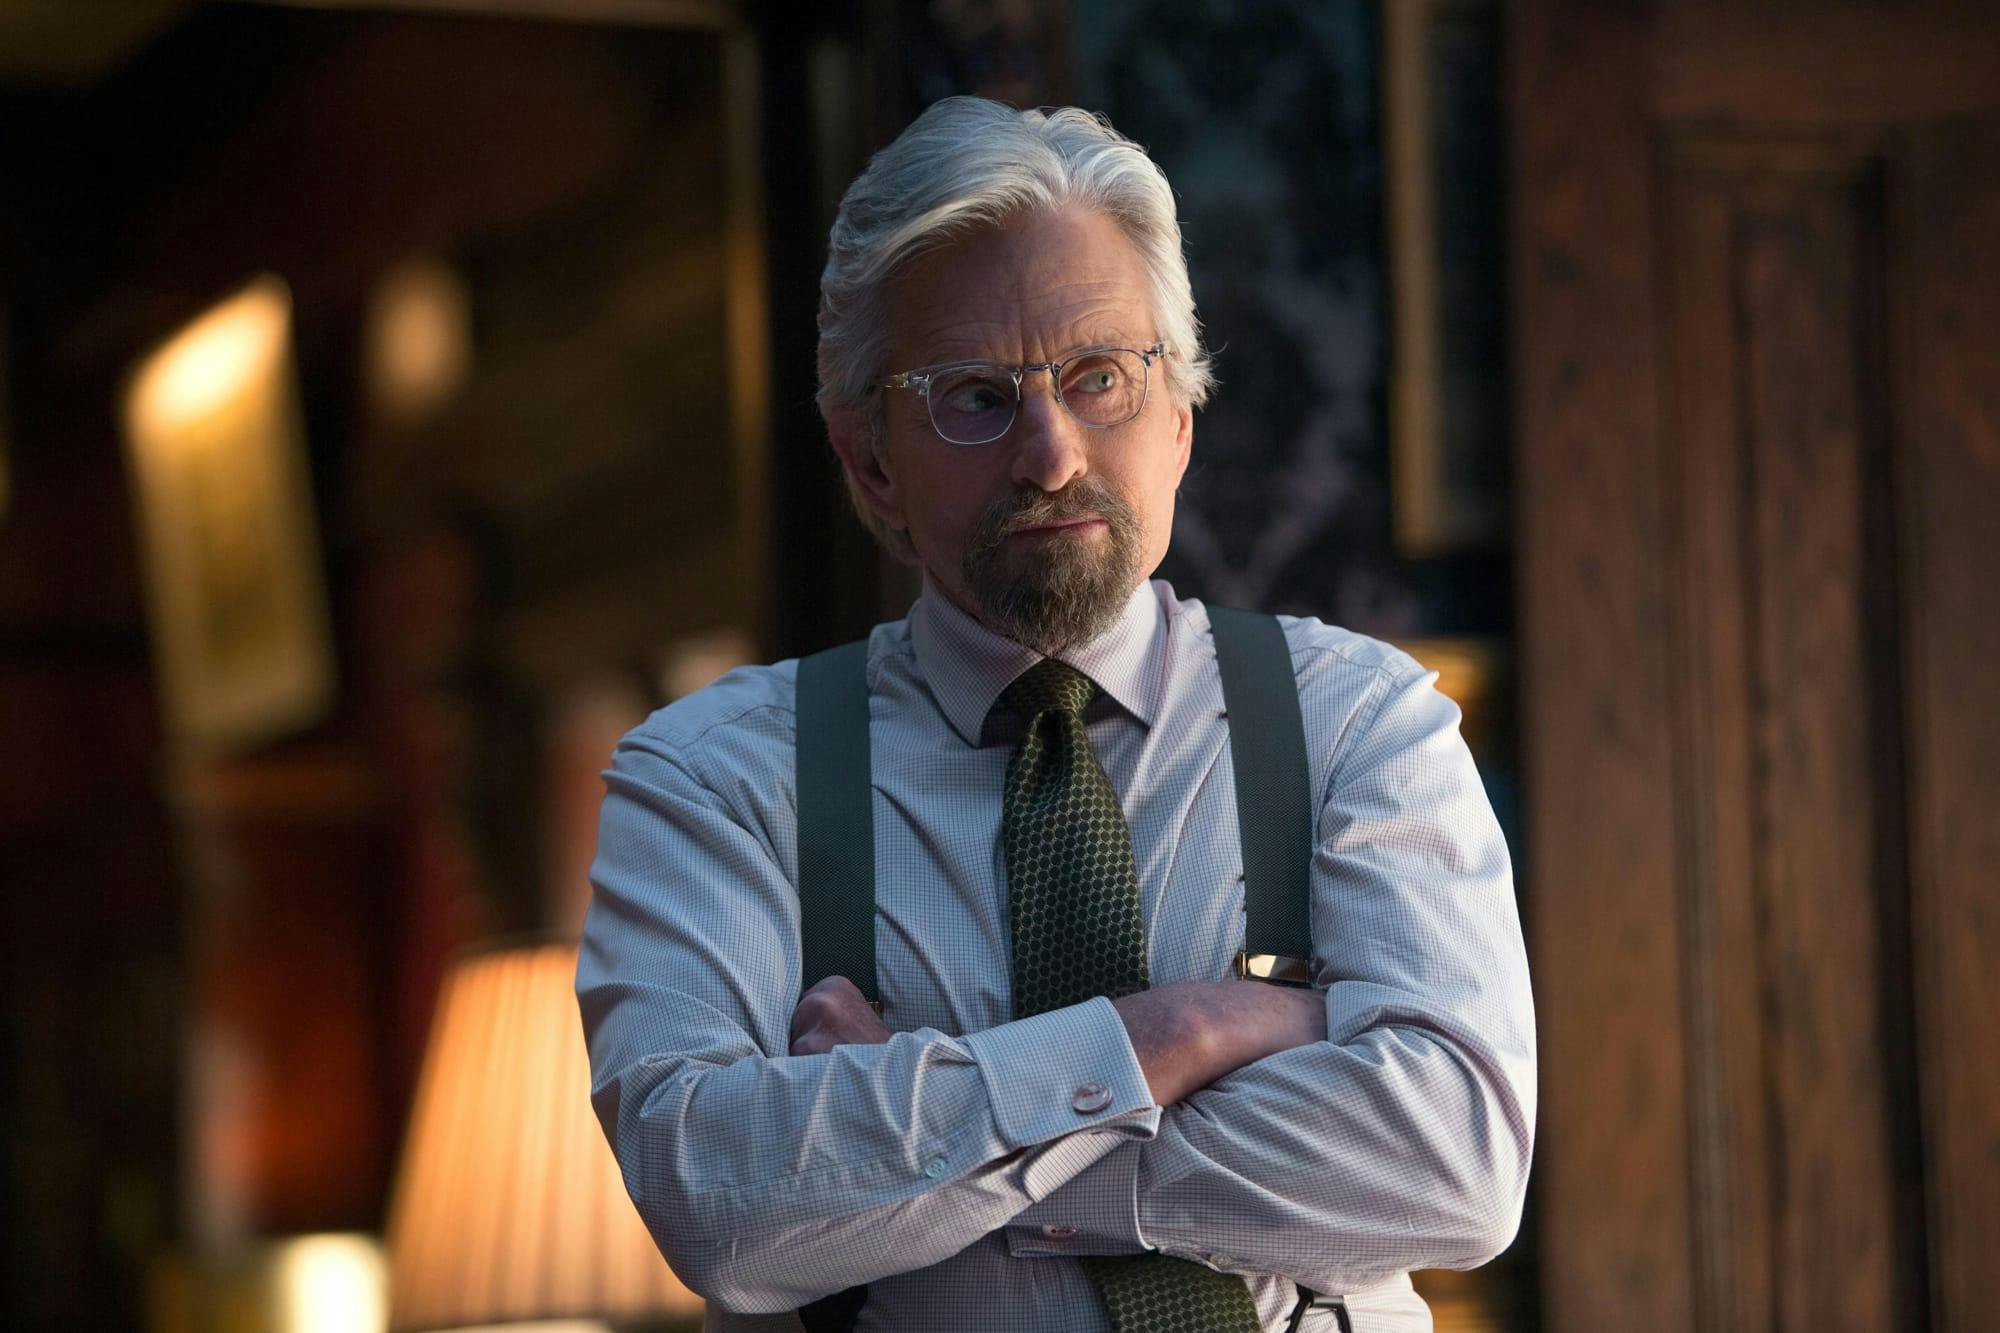 Dr. Hank Pym (Michael Douglas) in Ant-Man stands wearing suspenders (again!) folding his arms across his chest.